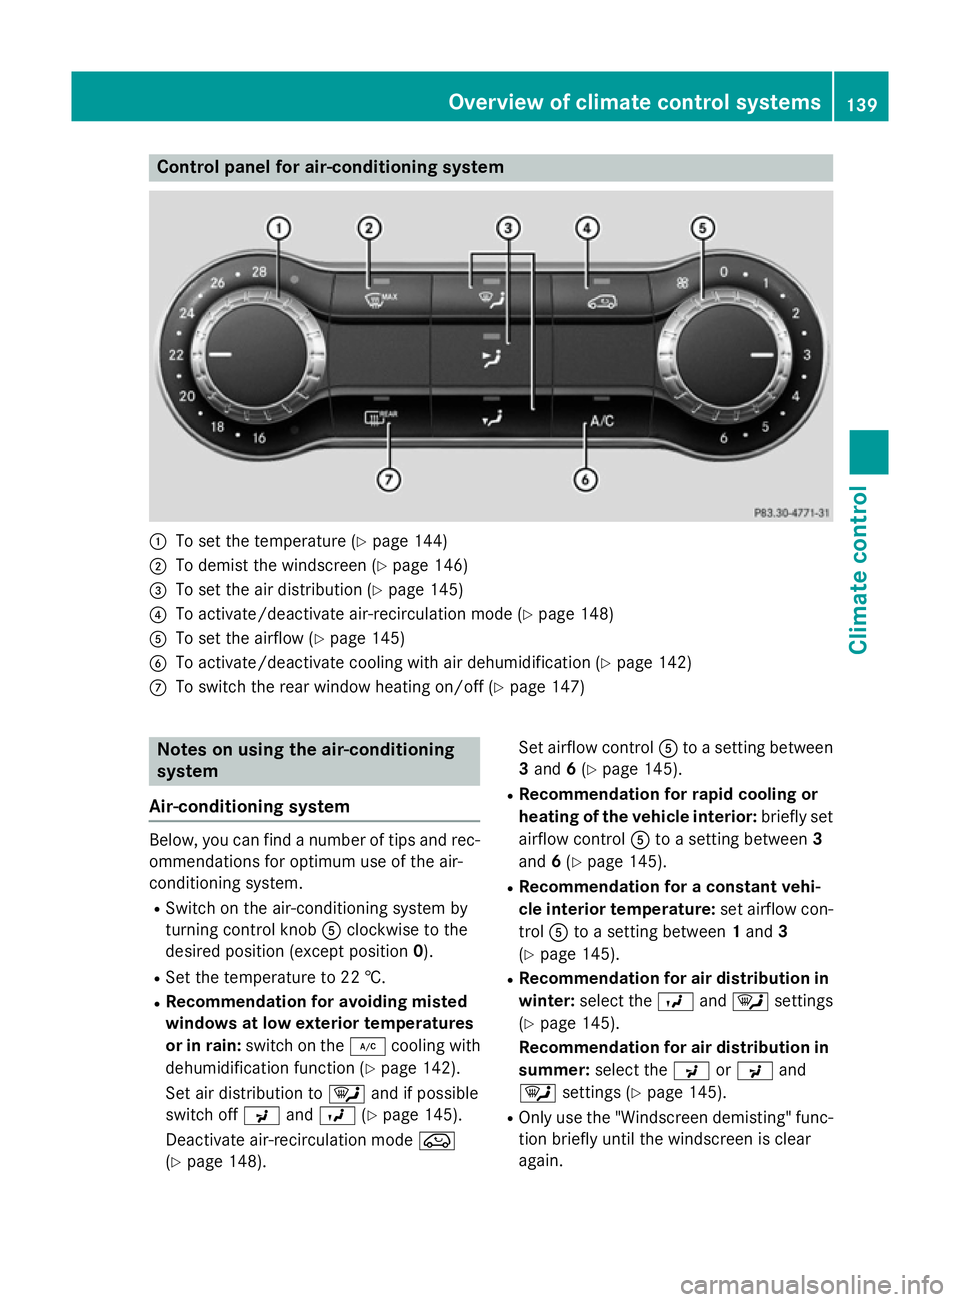 MERCEDES-BENZ GLA SUV 2013  Owners Manual Control panel for air-conditioning system
:
To set the temperature (Y page 144)
; To demist the windscreen (Y page 146)
= To set the air distribution (Y page 145)
? To activate/deactivate air-recircul